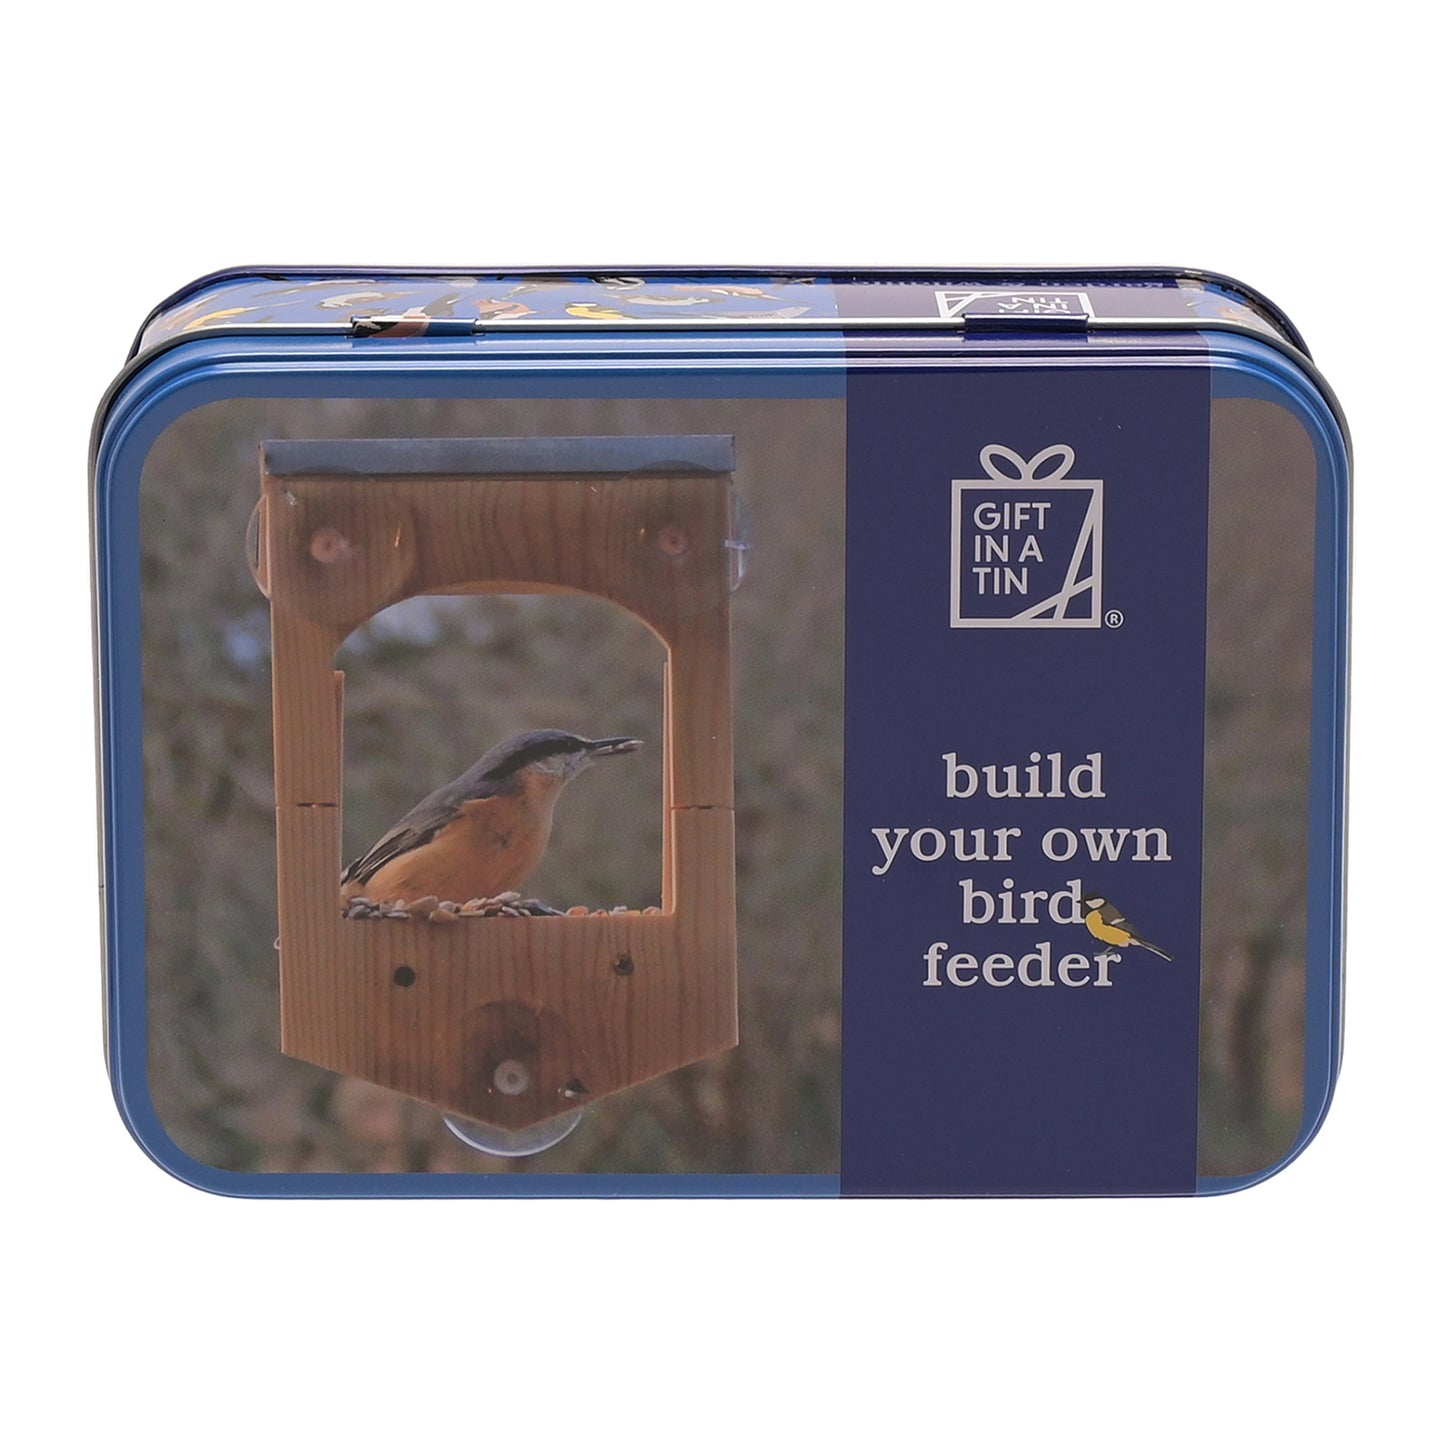 Apples To Pears Gift In A Tin Build A Bird Feeder